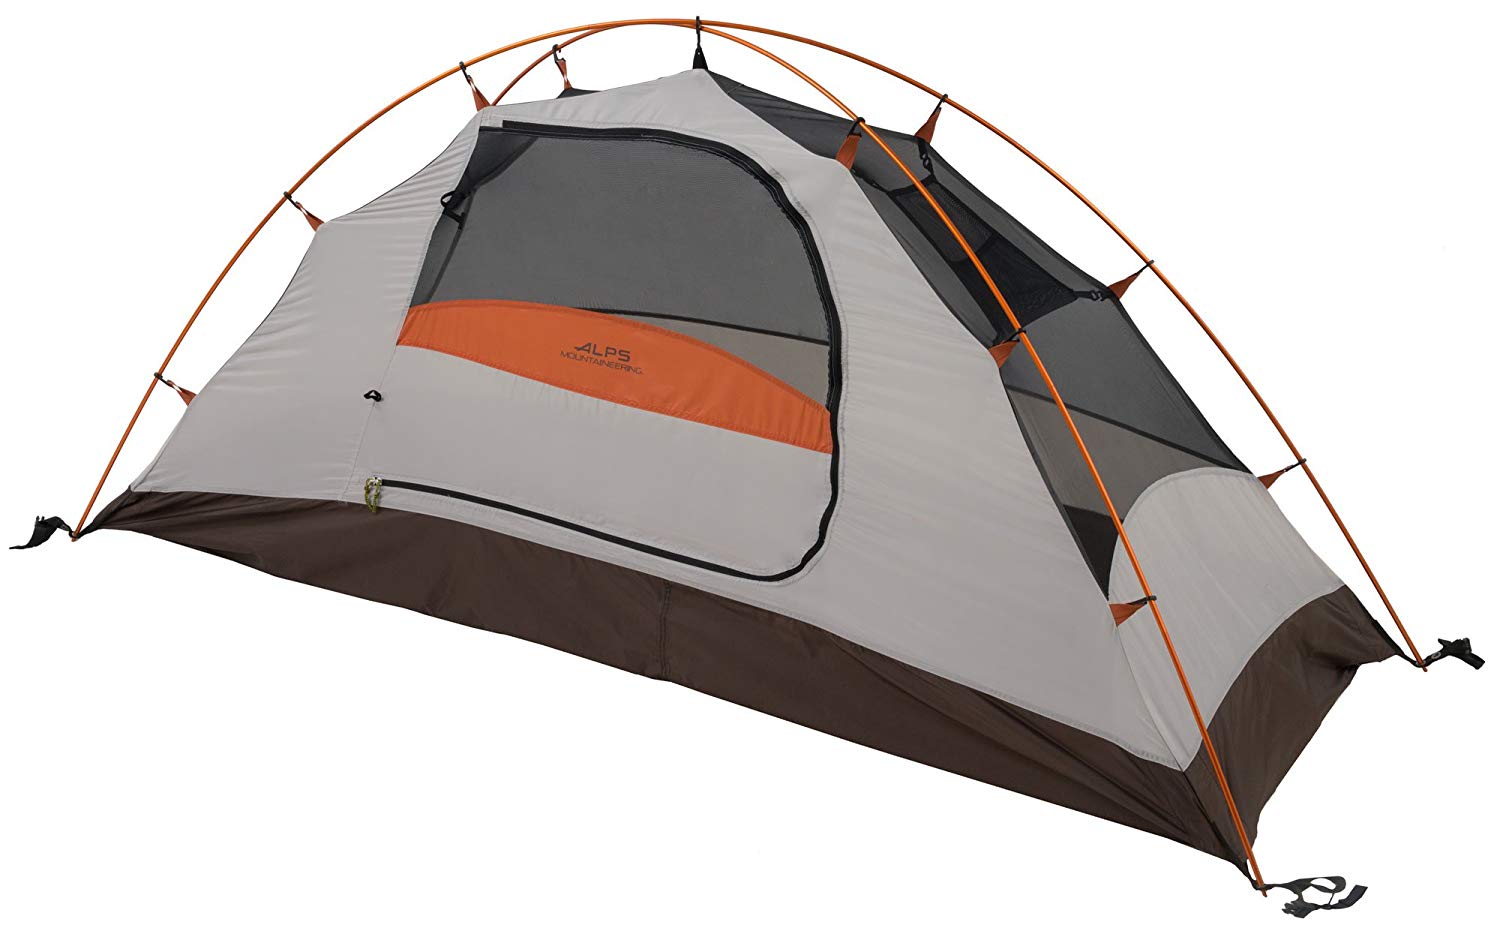 Gear Review - The Best Budget Backpacking Tents